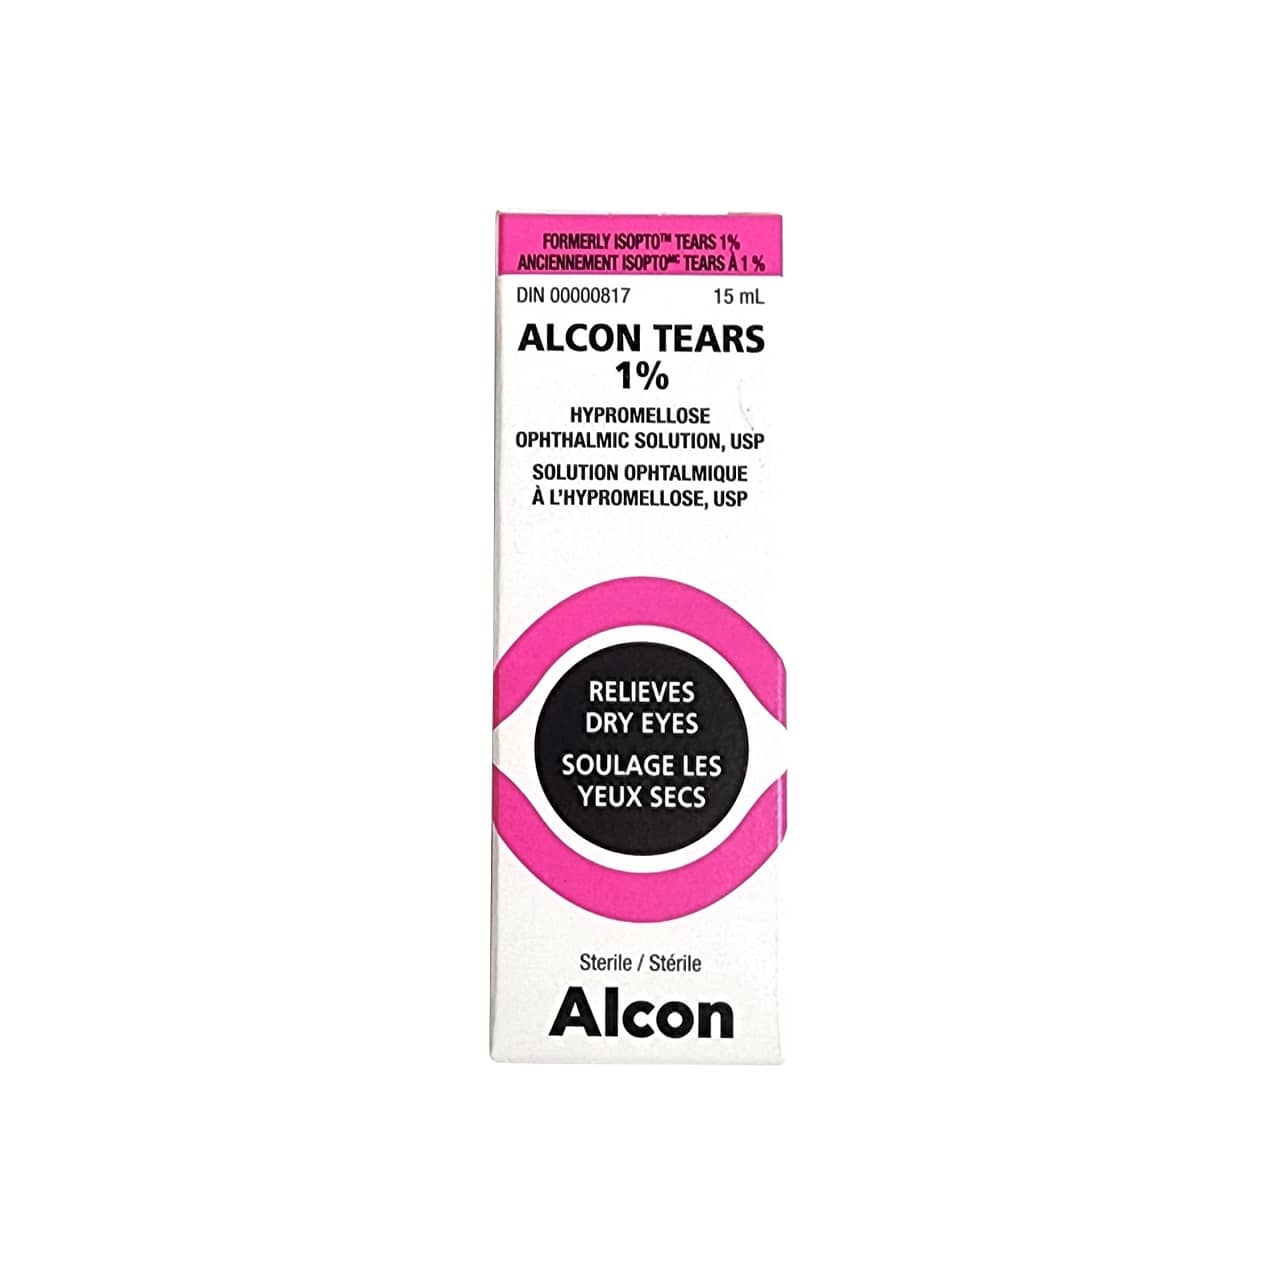 Product label for Alcon Tears 1% (15 mL)